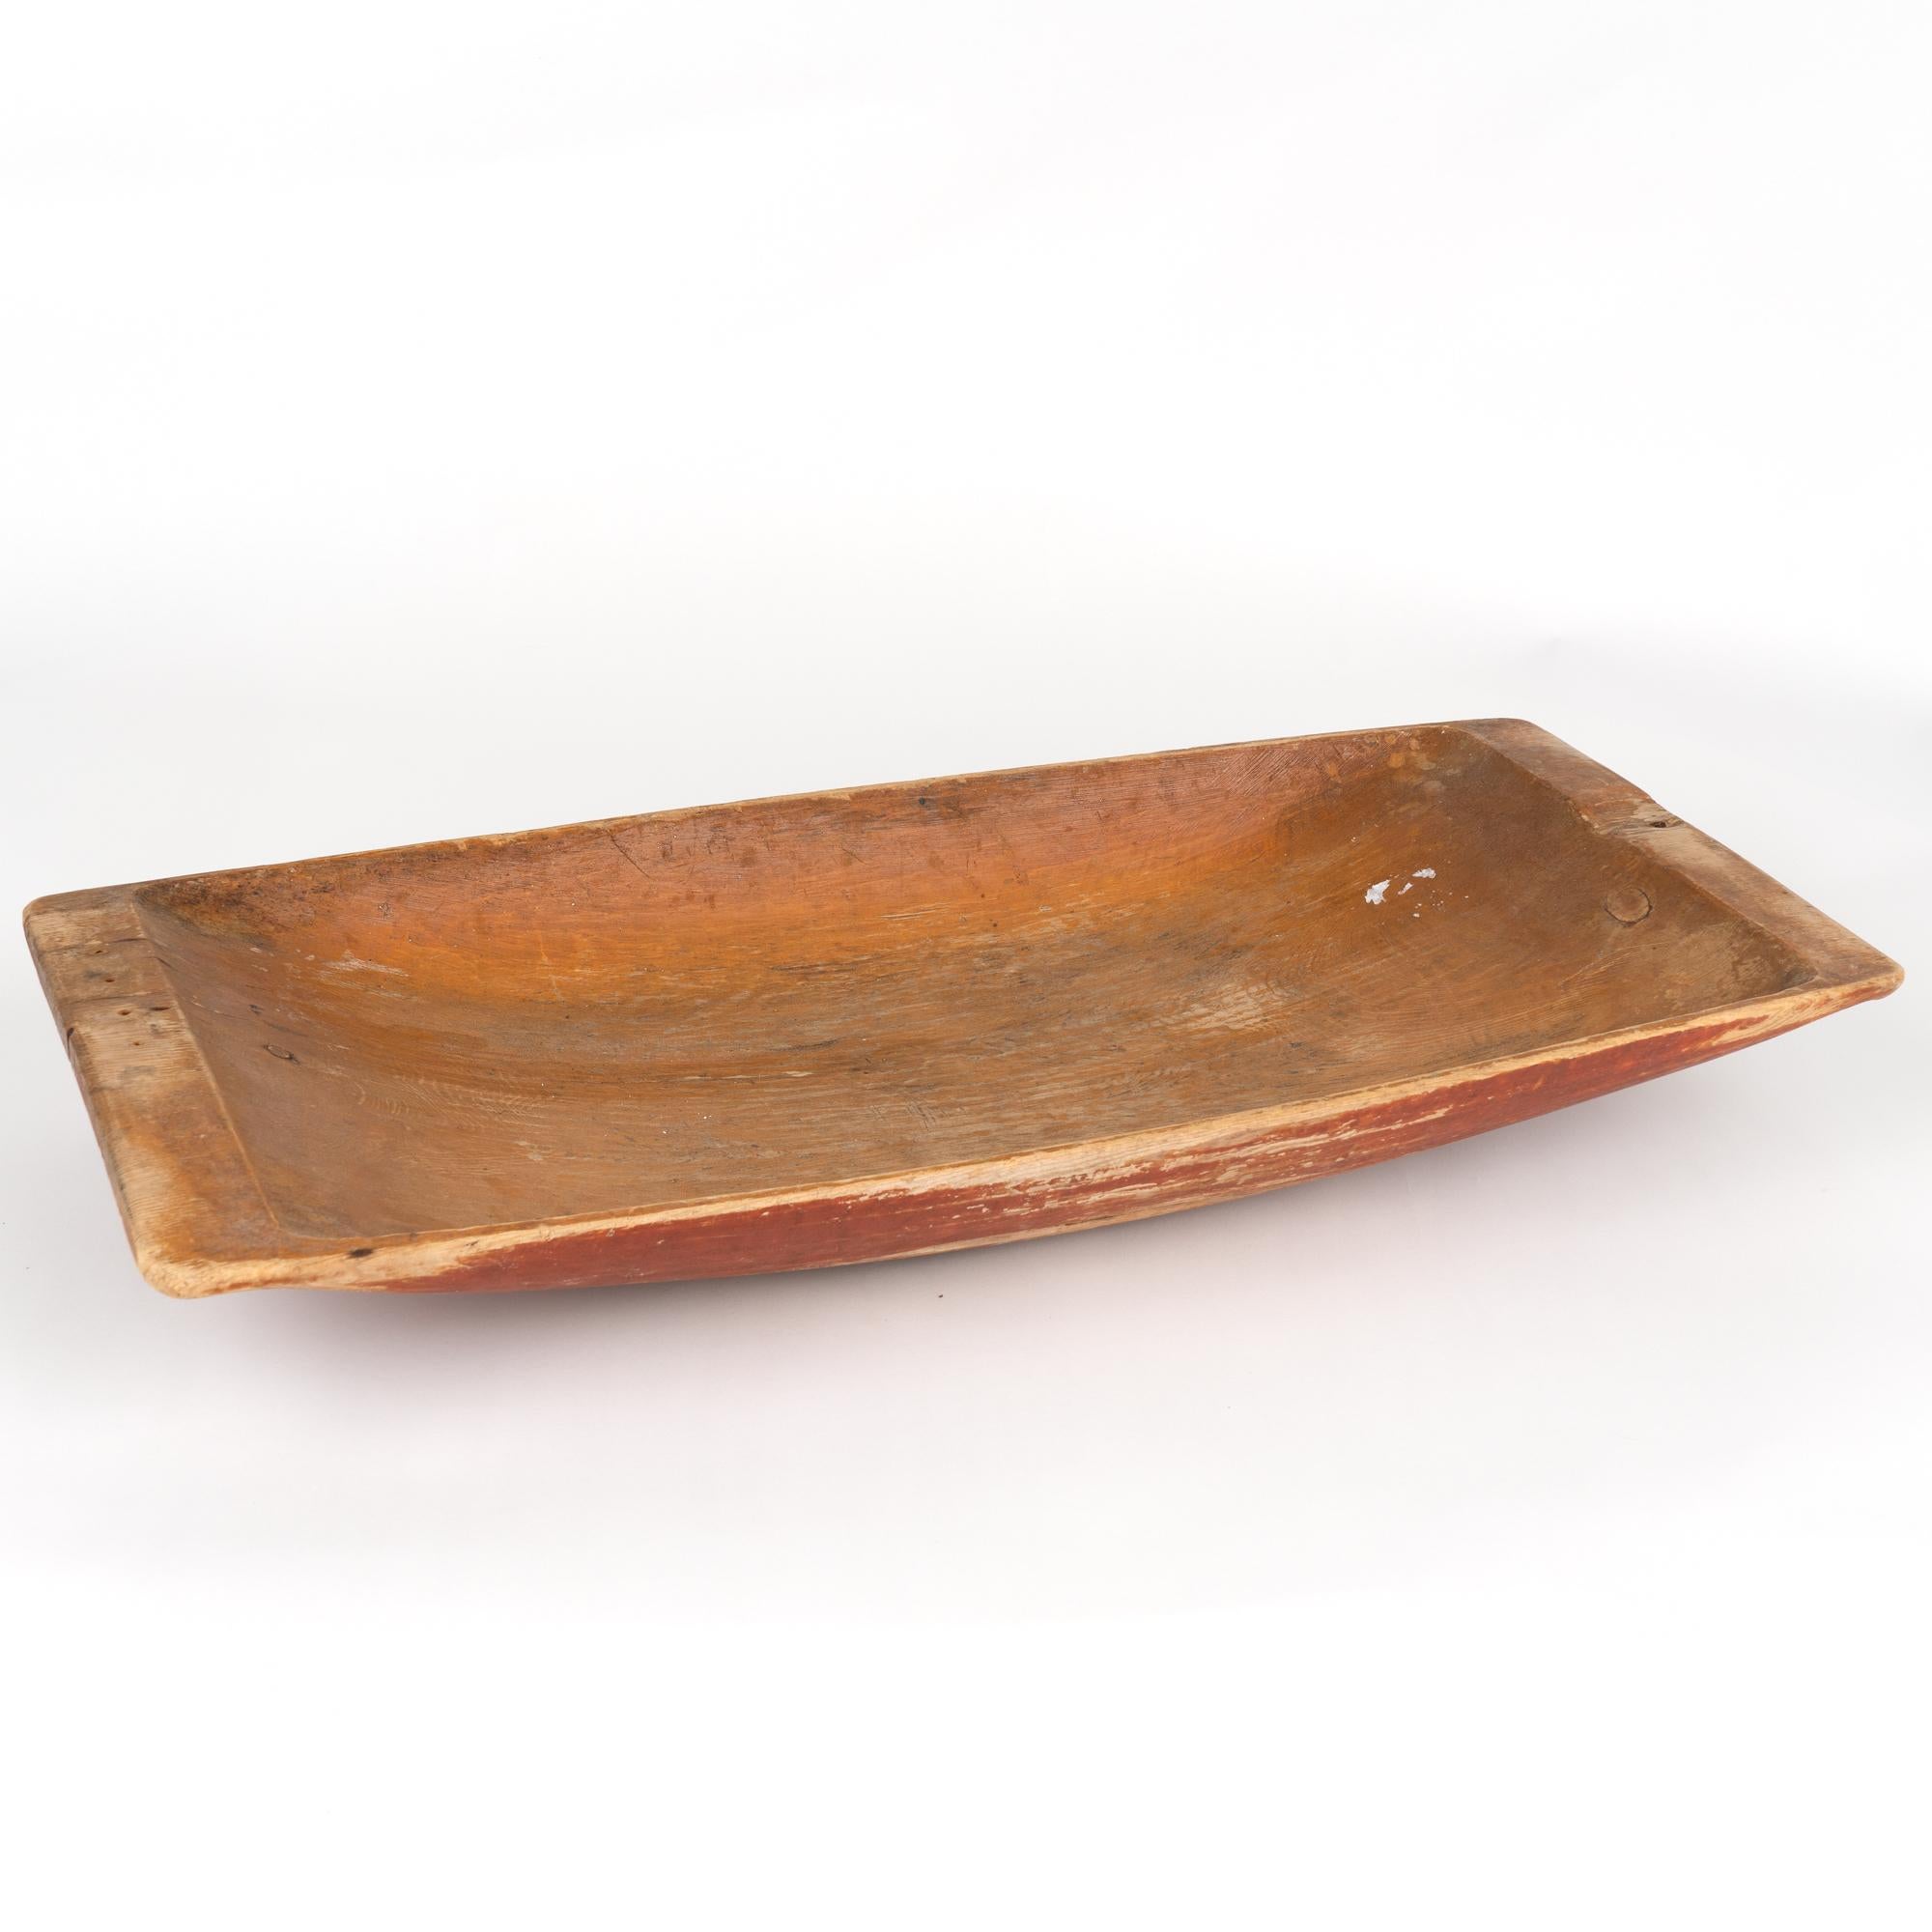 Original Swedish Folk Art pine carved wooden bowl with original red paint and warm patina. These bowls were used throughout families and often passed down generation to next generation. This bowl remains a highly functional item and now serve as a